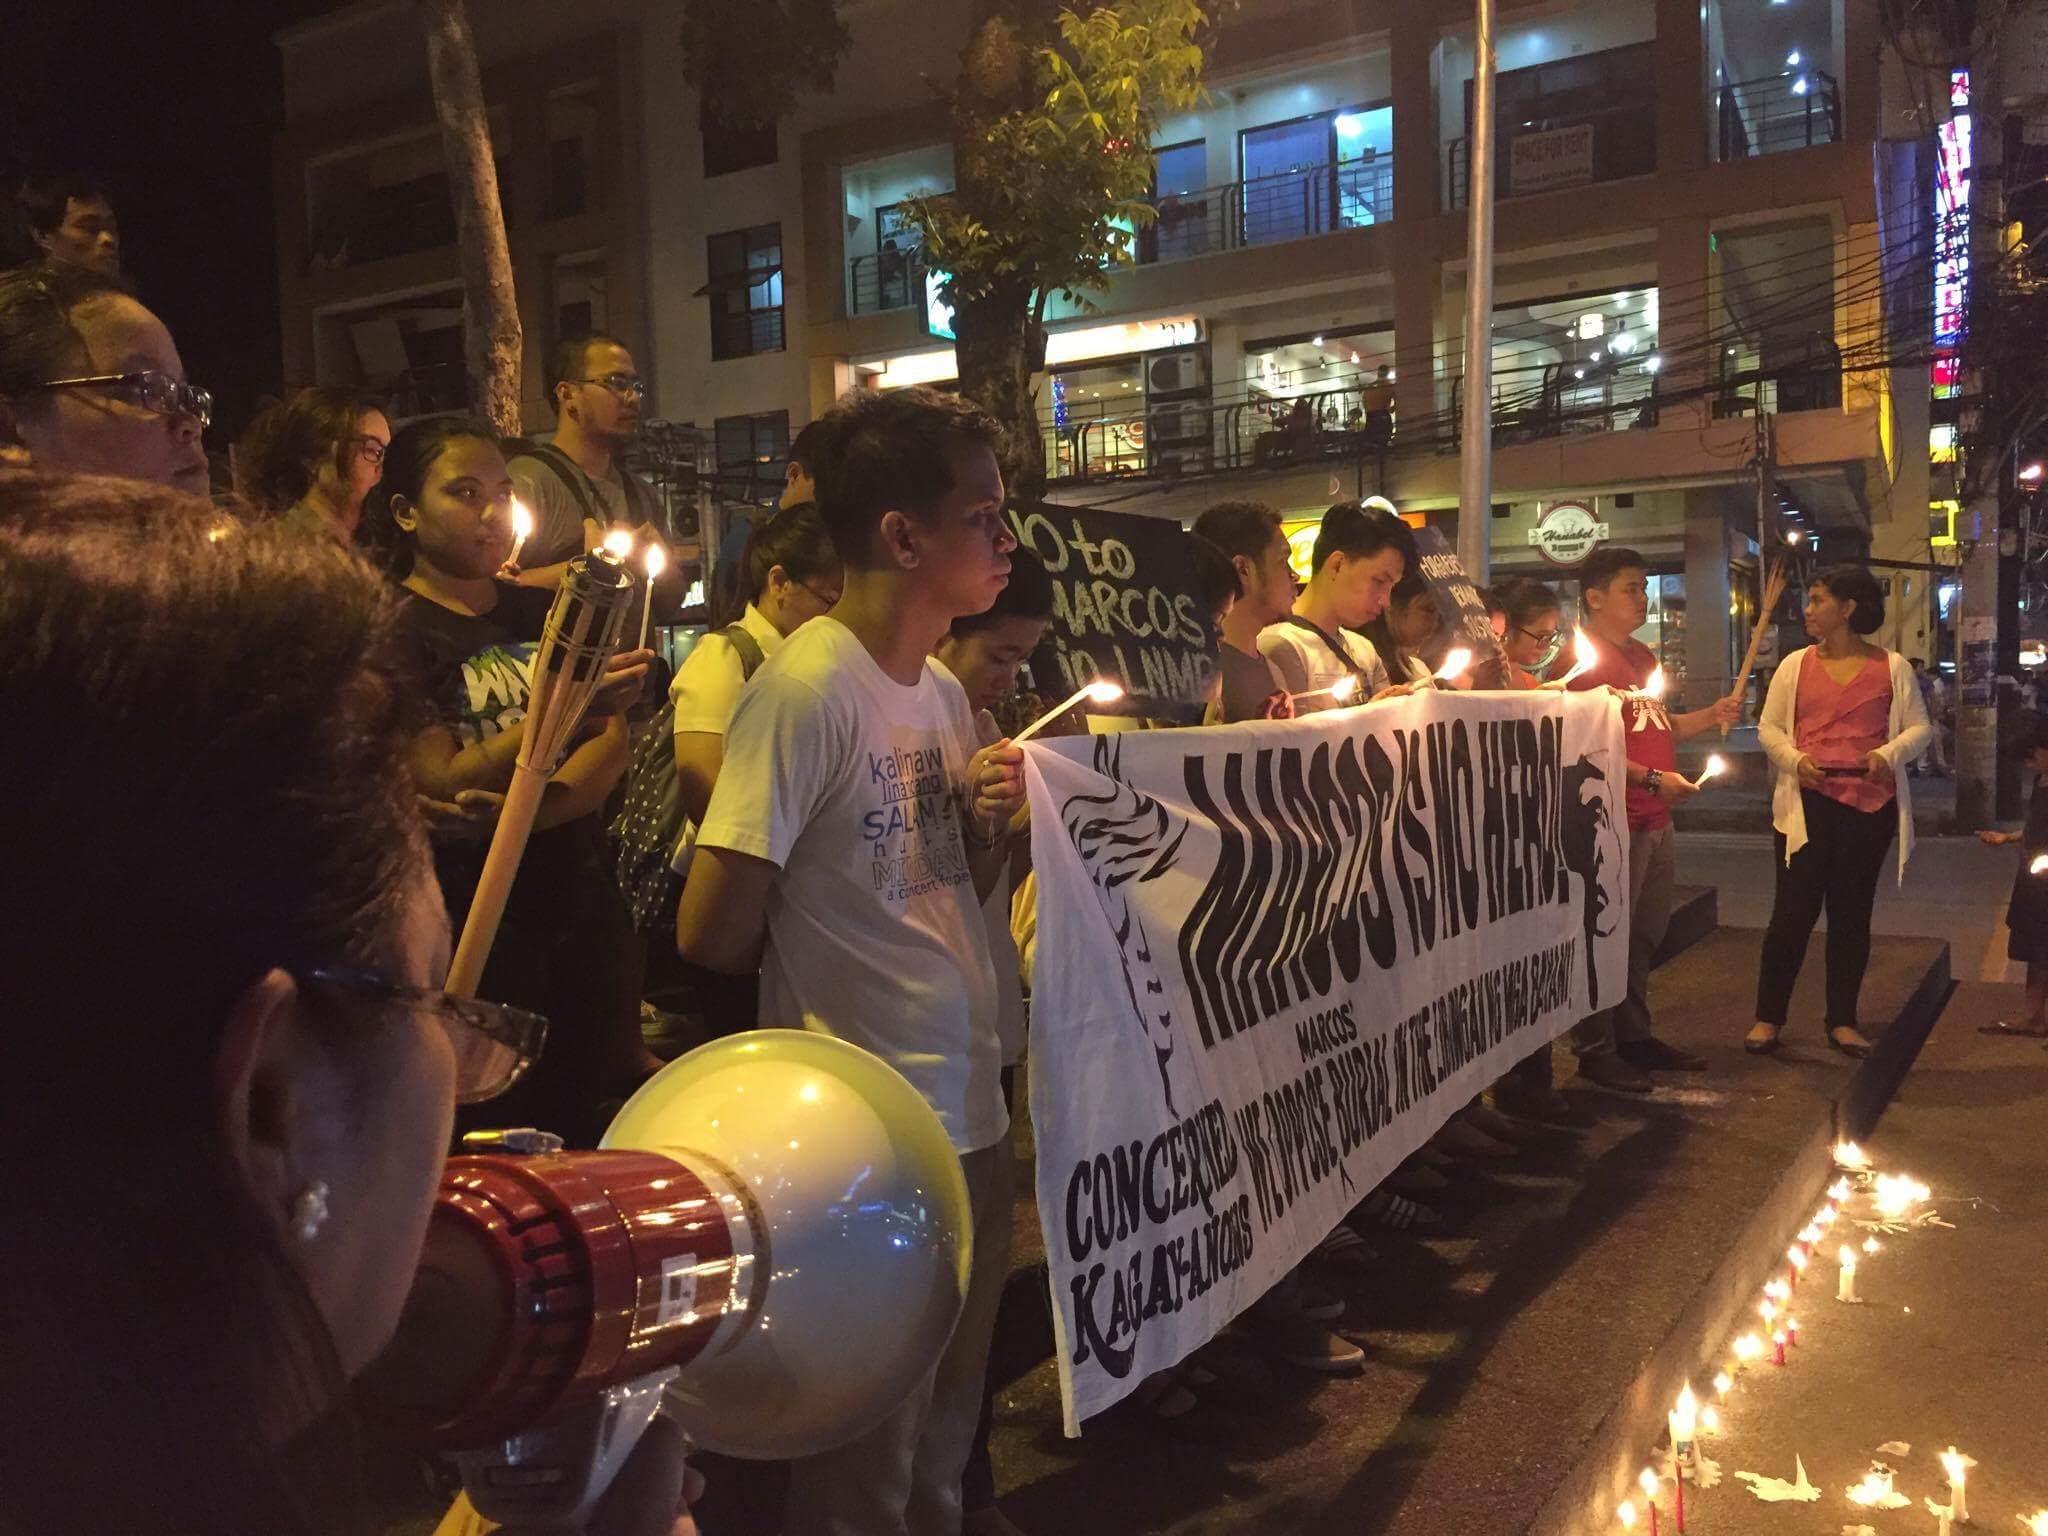 HEAR MINDANAO. Residents in Cagayan de Oro held a candle light rally in historic Plaza Divisoria denouncing the Supreme Court decision allowing the burial of late dictator Ferdinand Marcos. Photo courtesy of Cong Corrales. 